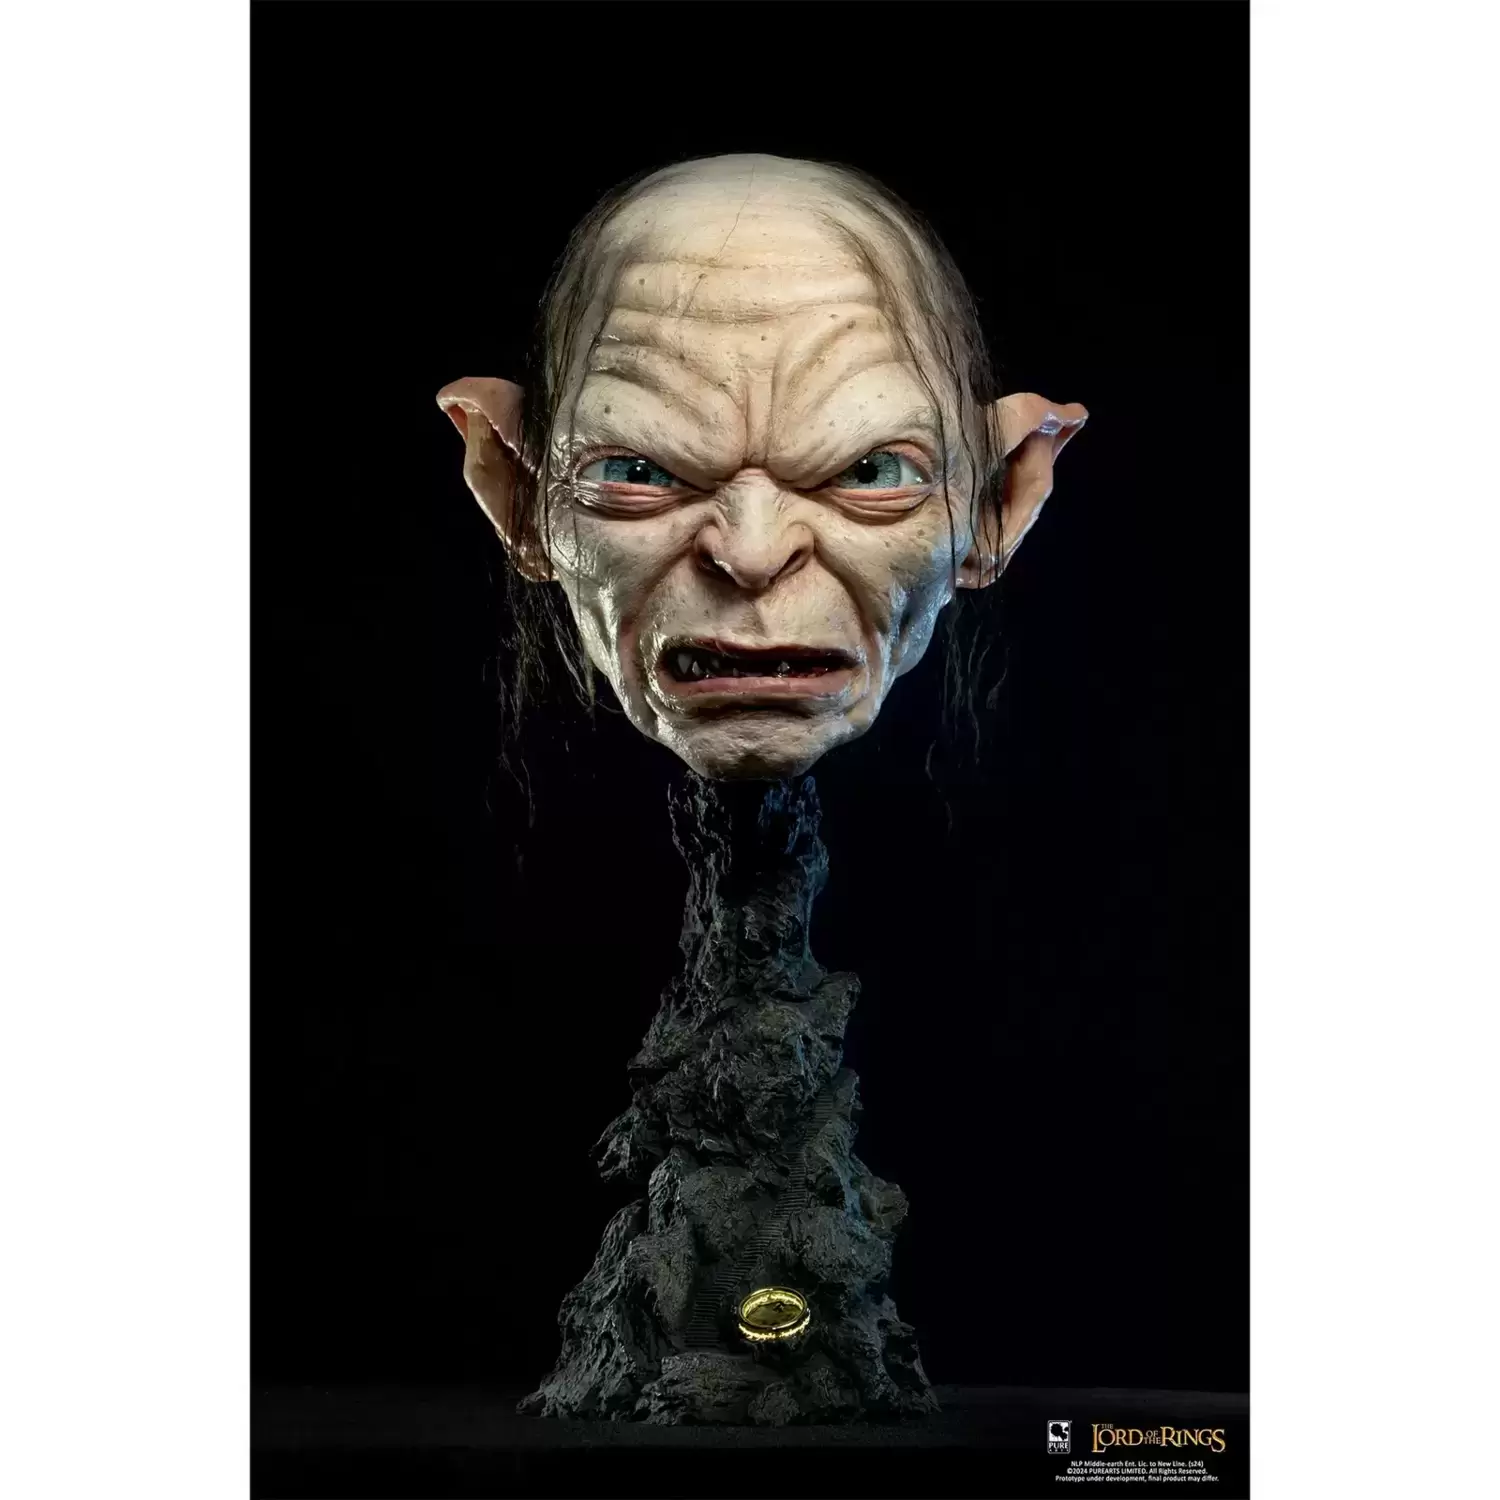 PureArts - The Lord Of The Rings - Gollum Art Mask